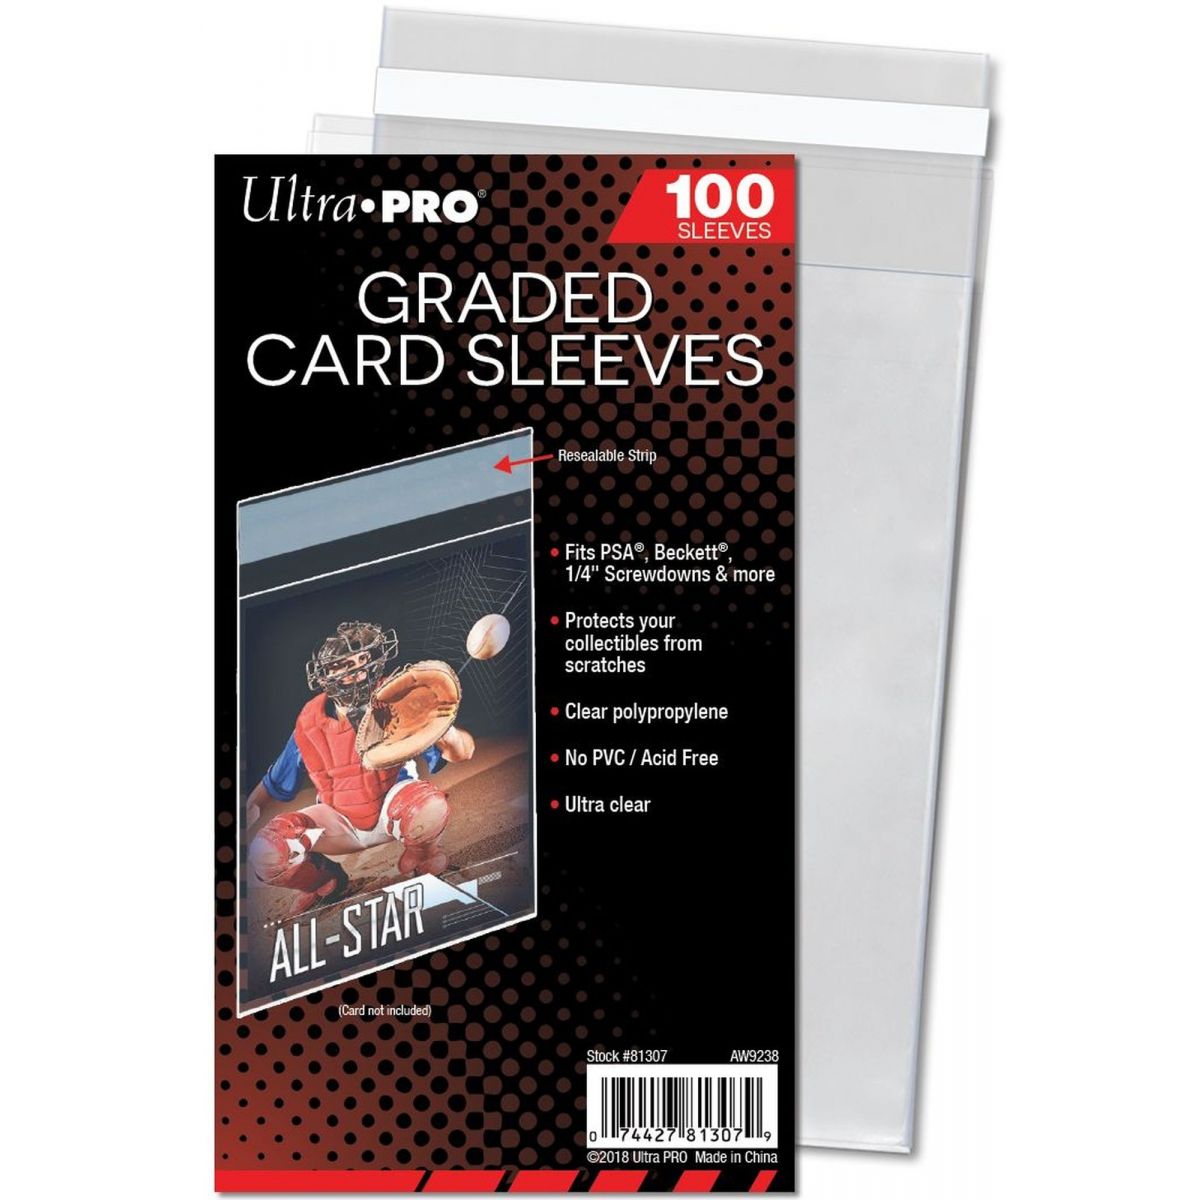 Item Ultra Pro - Team Bags - Graded Card Sleeves Resealable - Protège-cartes Gradées Refermables (100)